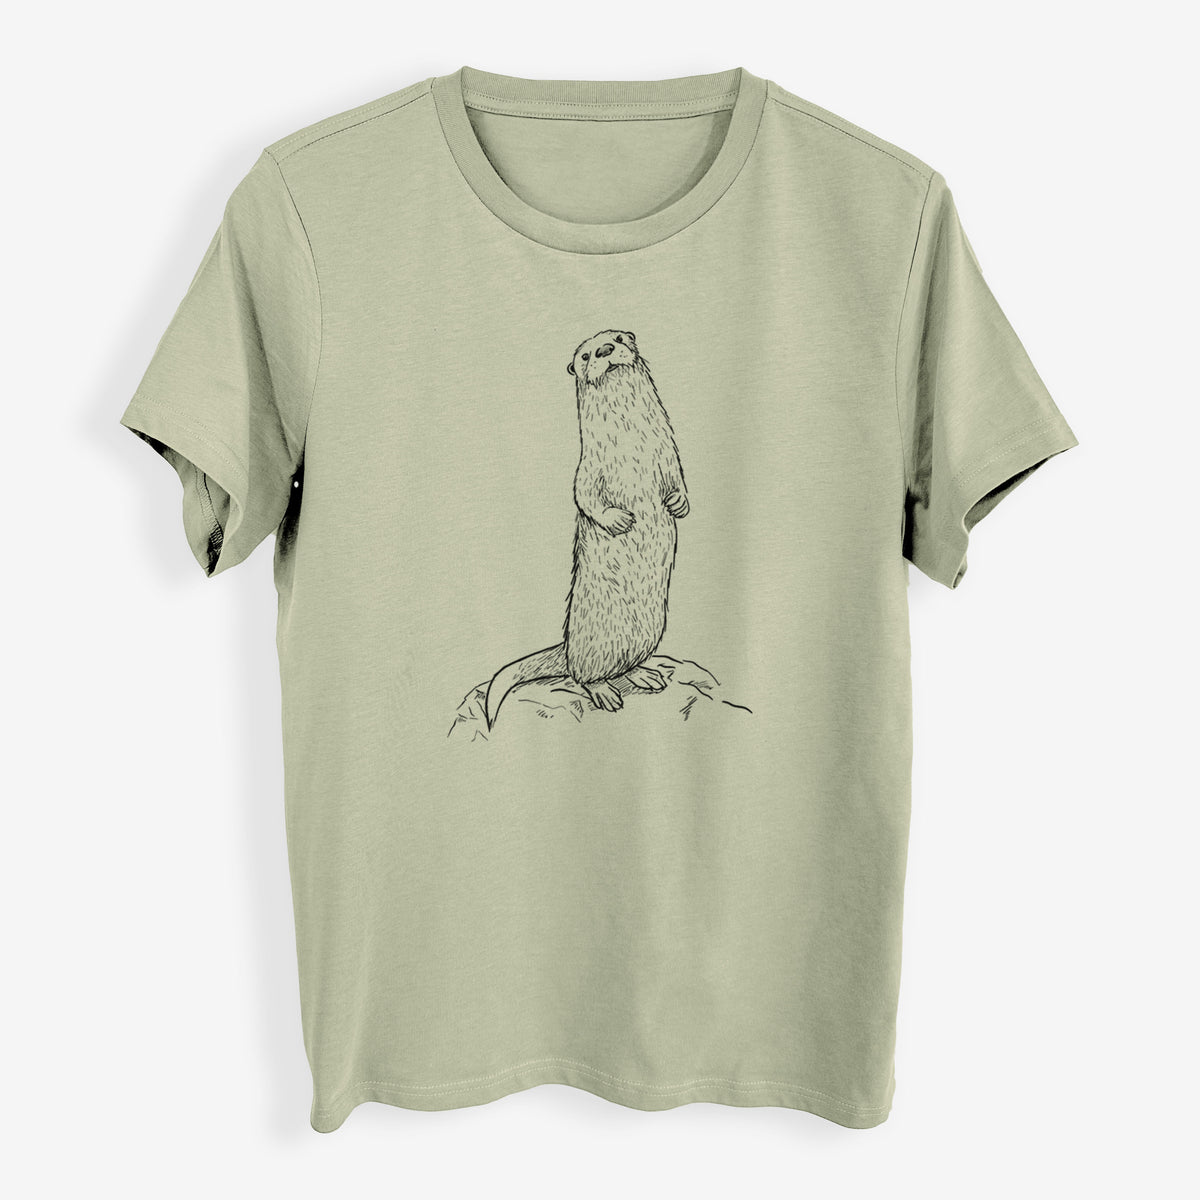 North American River Otter - Lontra canadensis - Womens Everyday Maple Tee